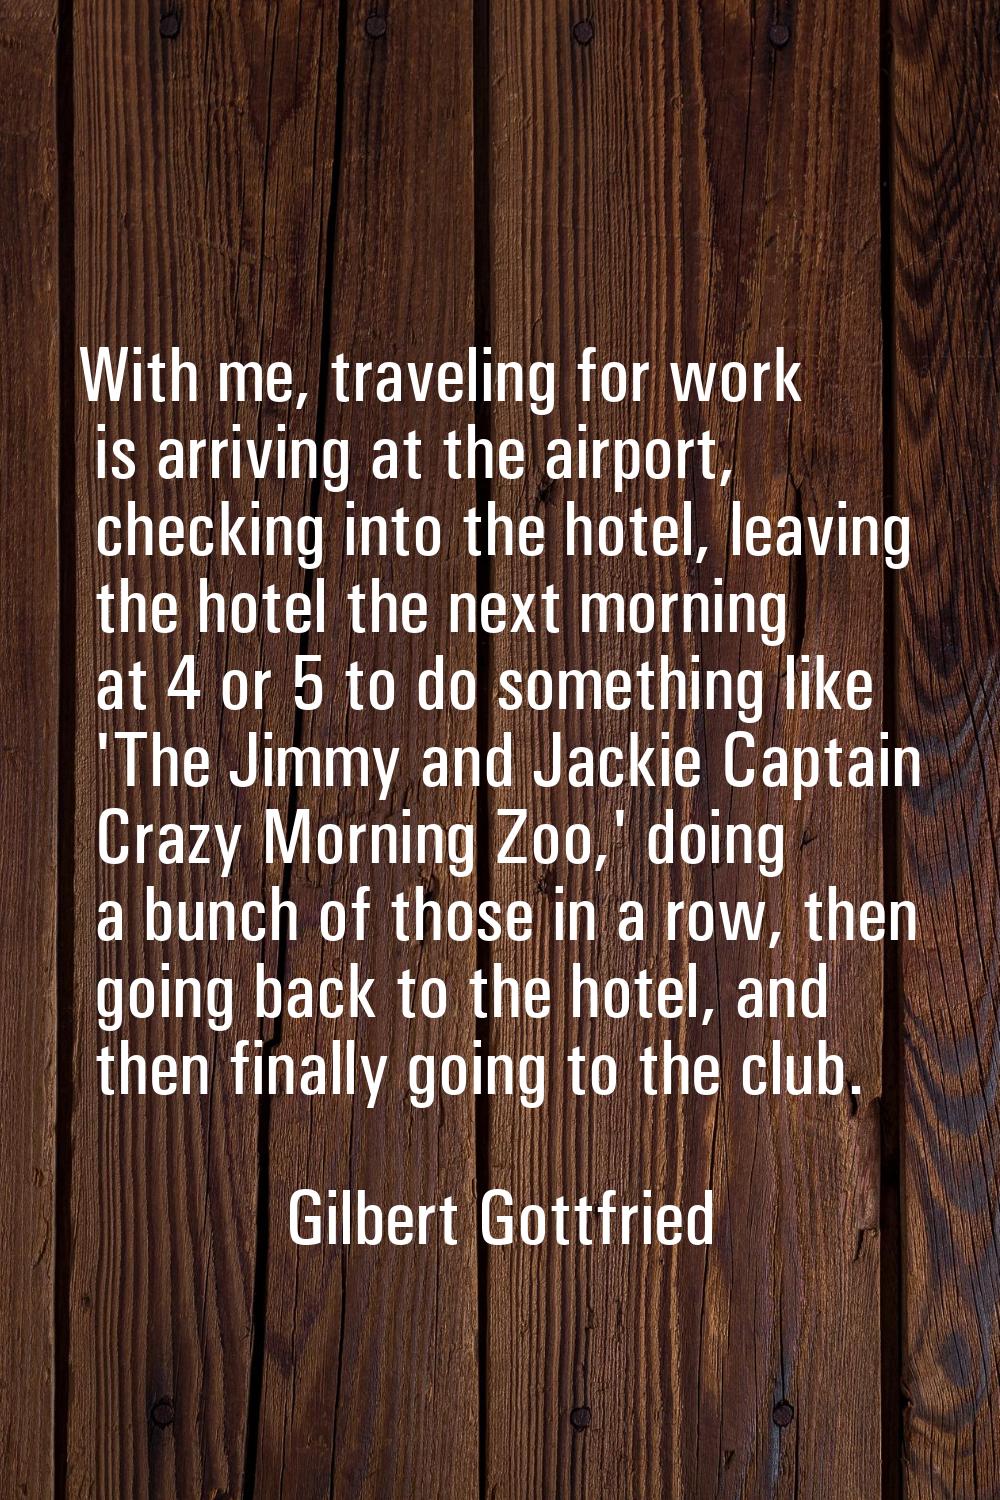 With me, traveling for work is arriving at the airport, checking into the hotel, leaving the hotel 